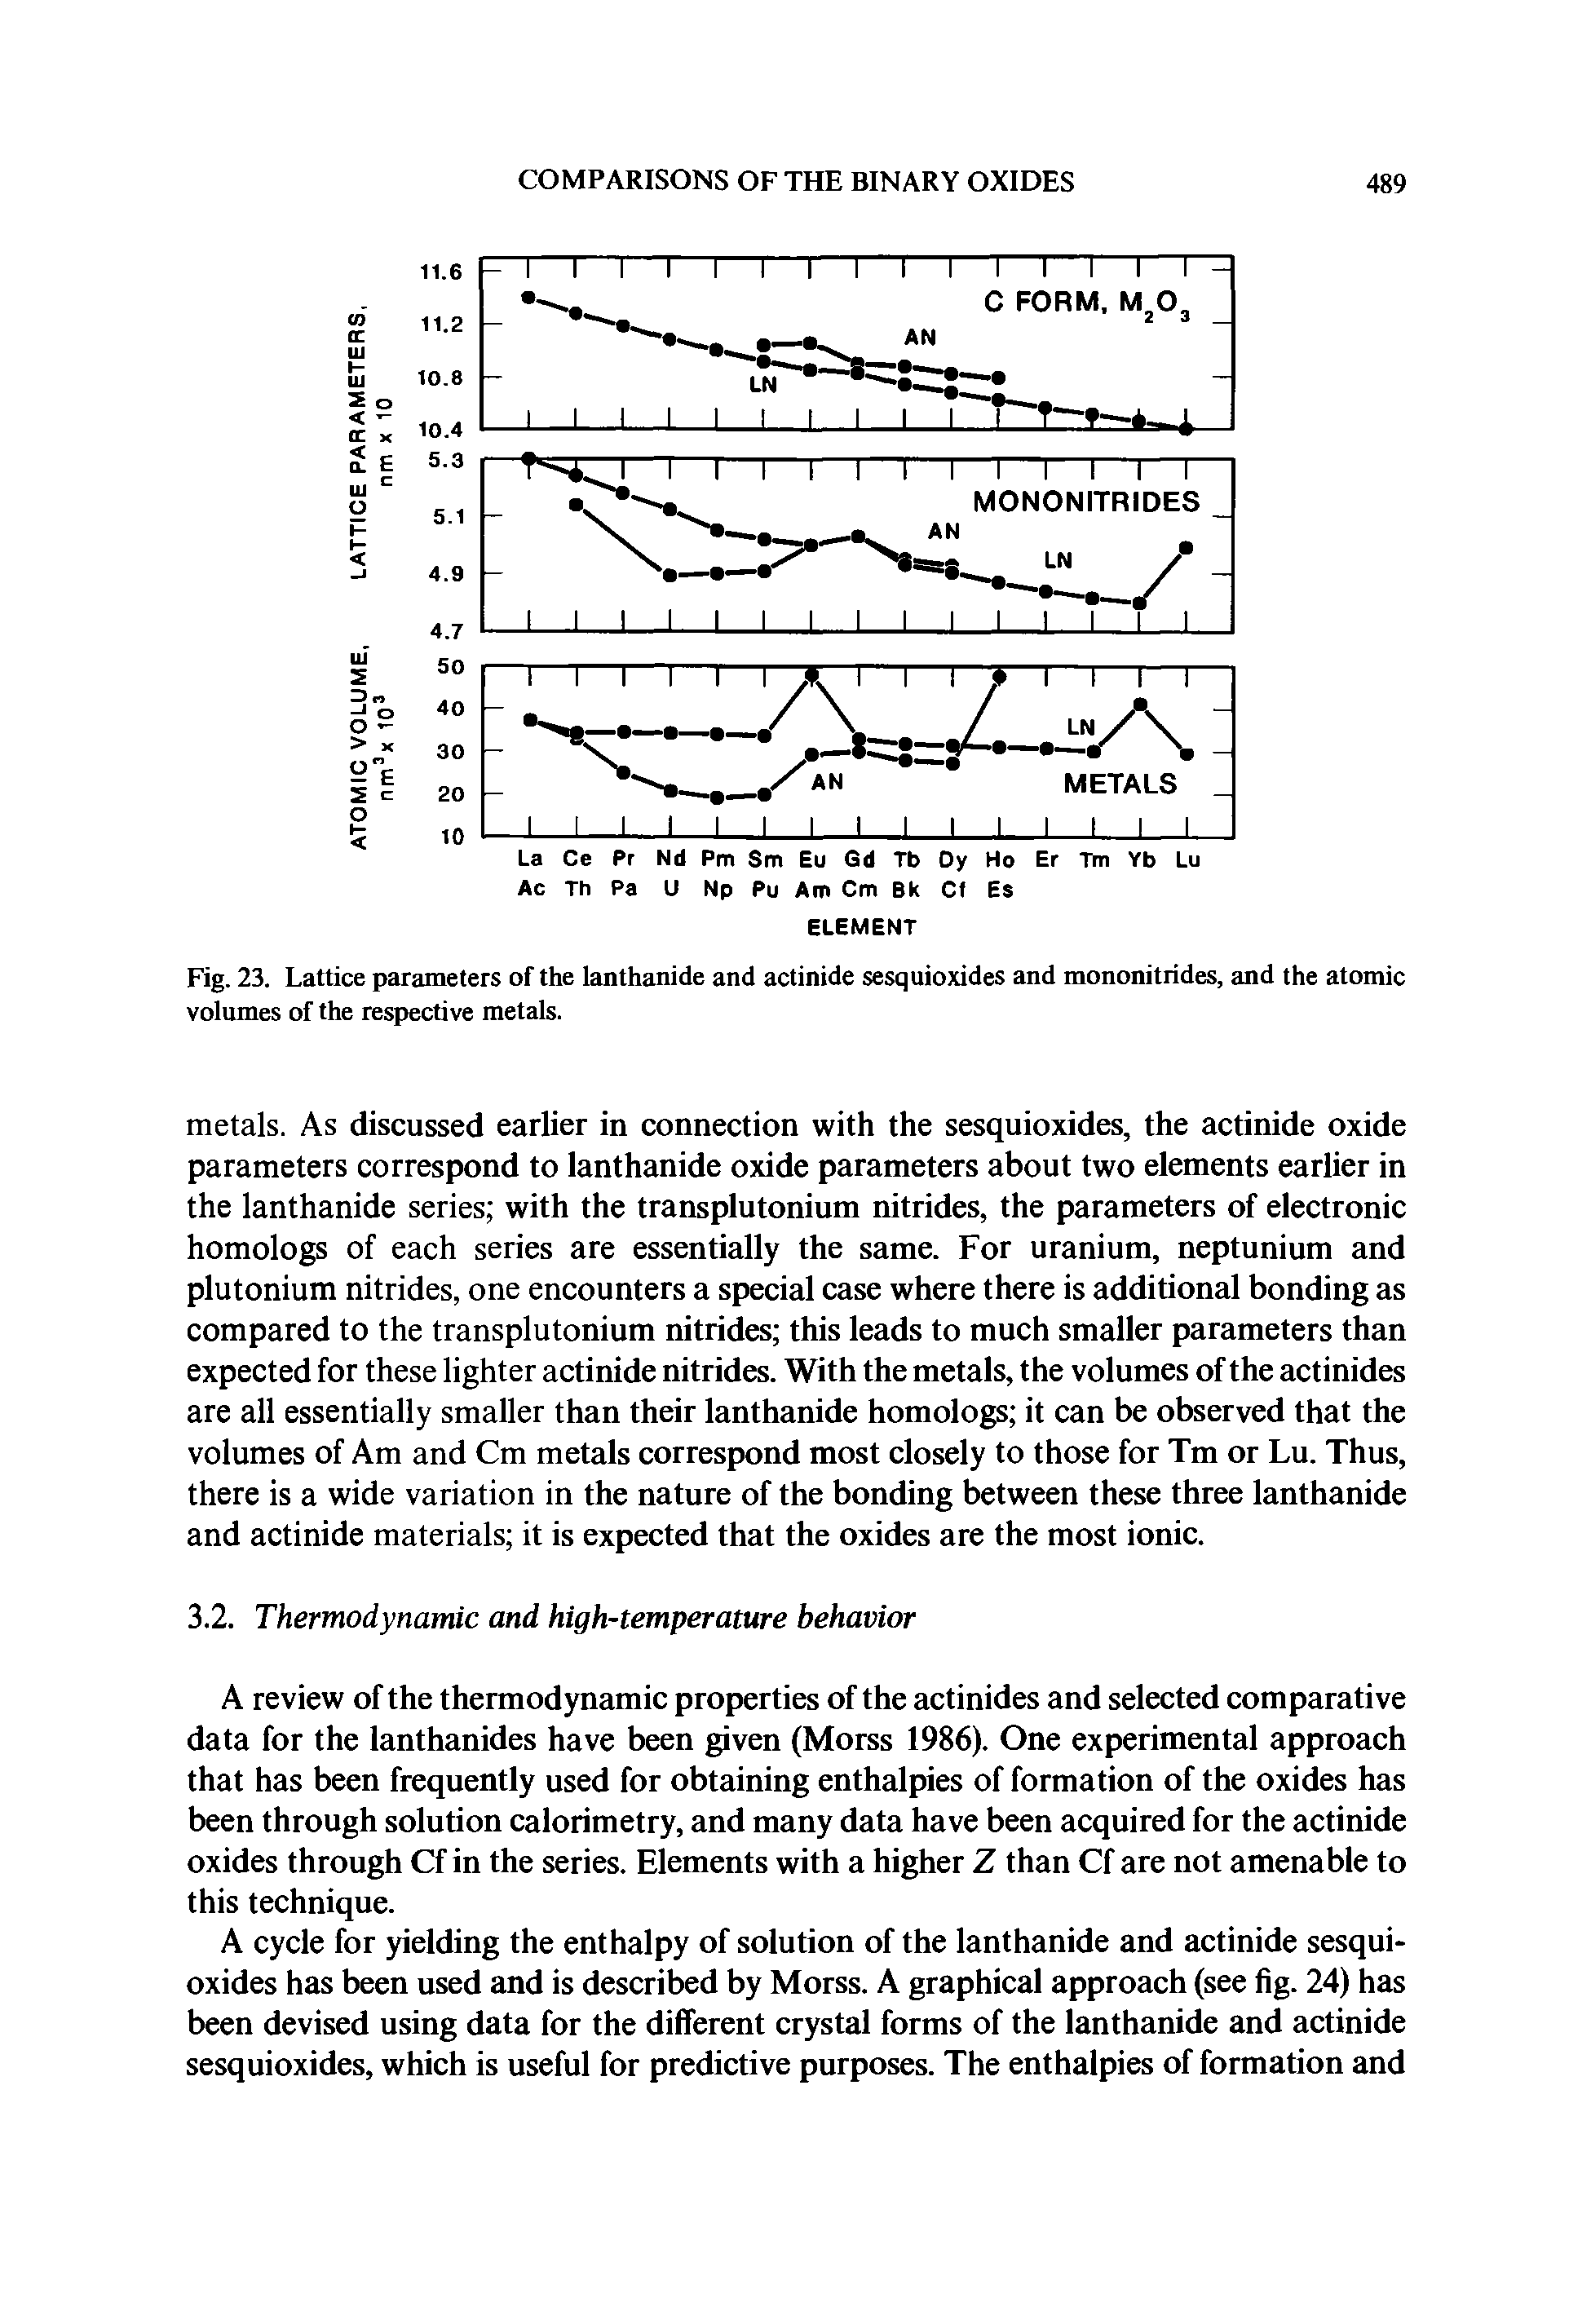 Fig. 23. Lattice parameters of the lanthanide and actinide sesquioxides and mononitiides, and the atomic volumes of the respective metals.